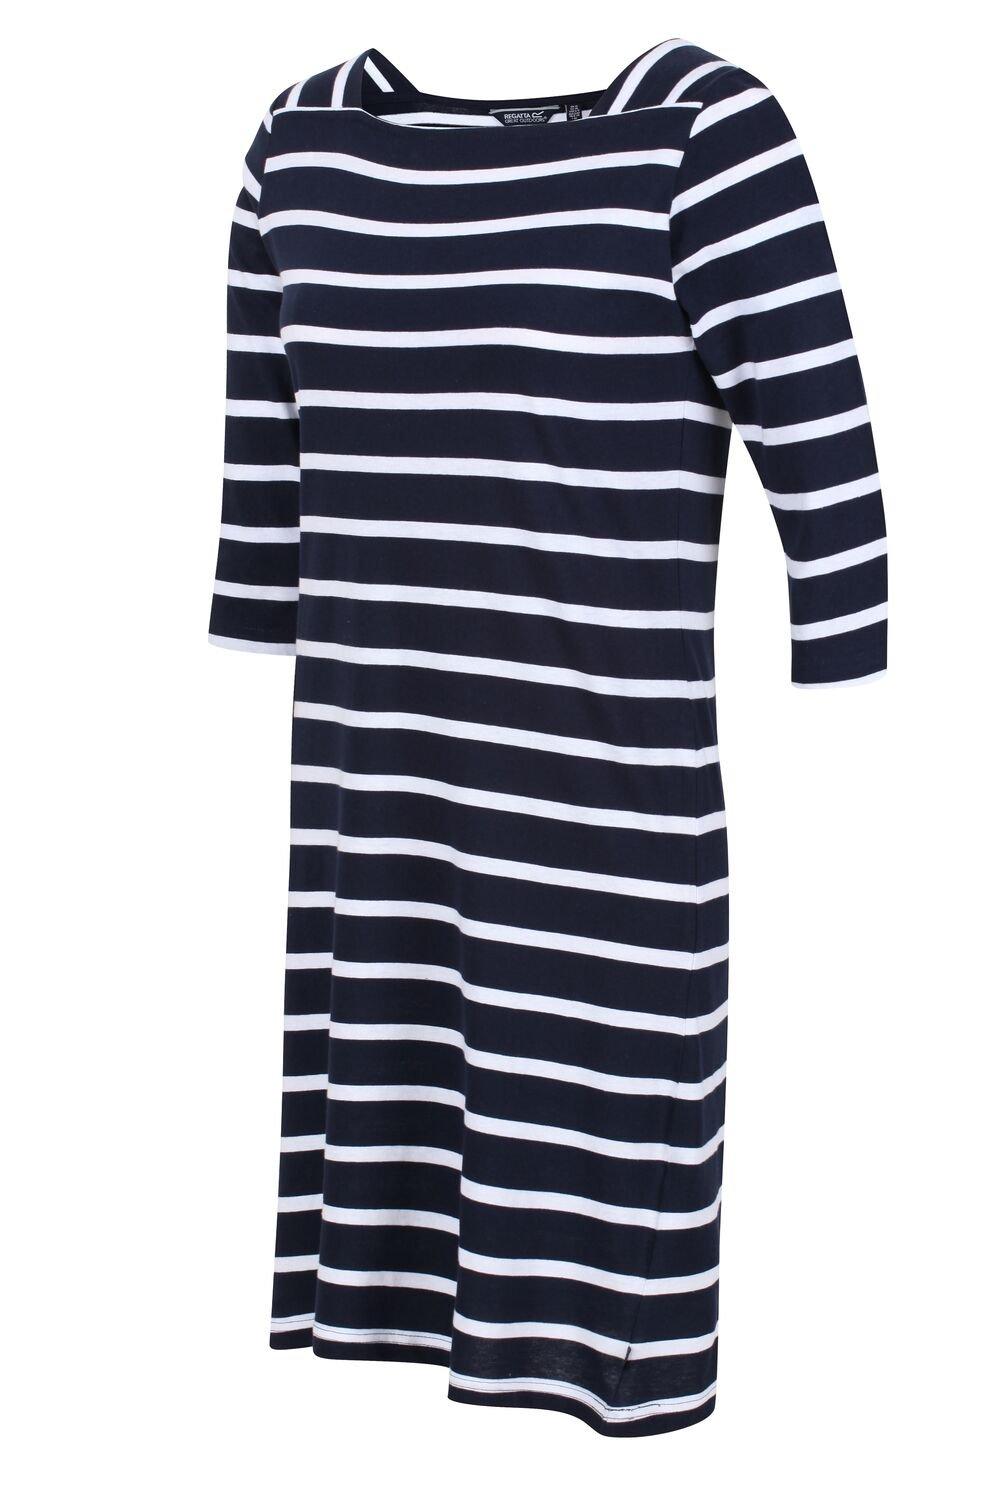 Coolweave Cotton 'Paislee' 3/4 Sleeve Dress